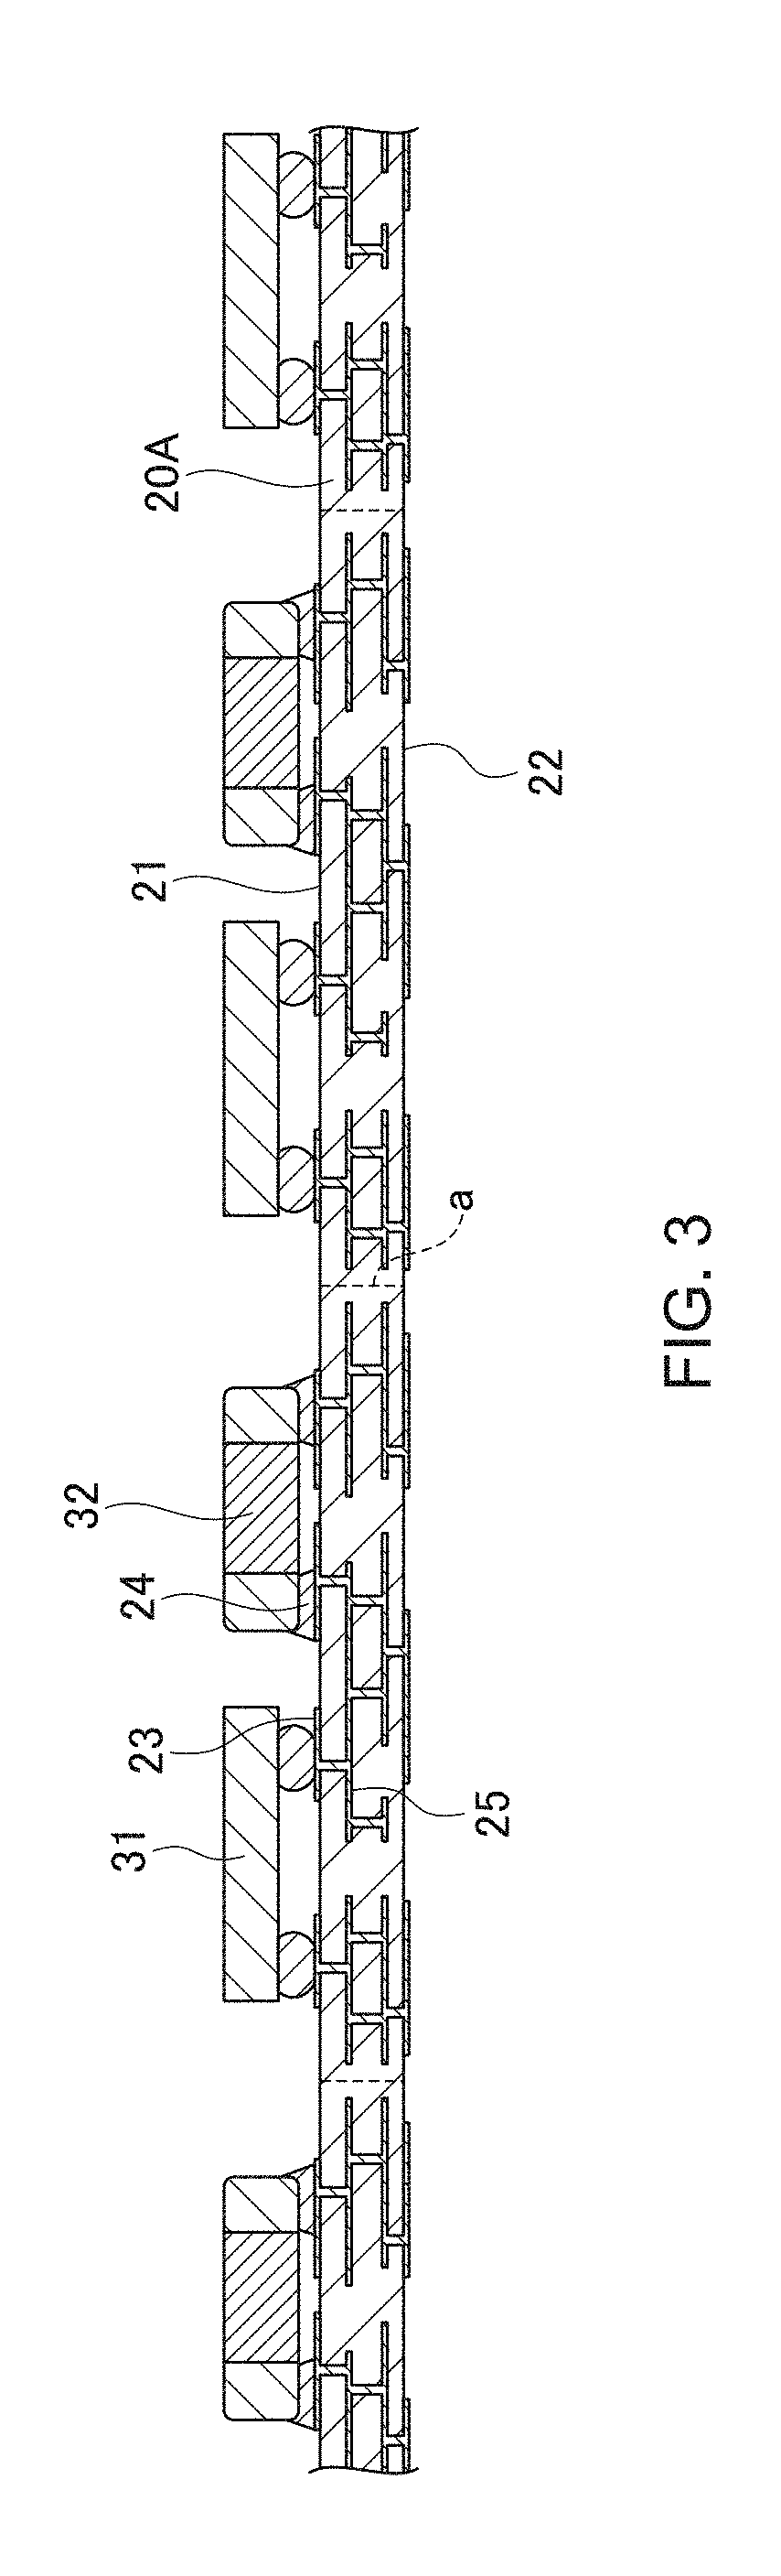 Electronic circuit package using composite magnetic sealing material